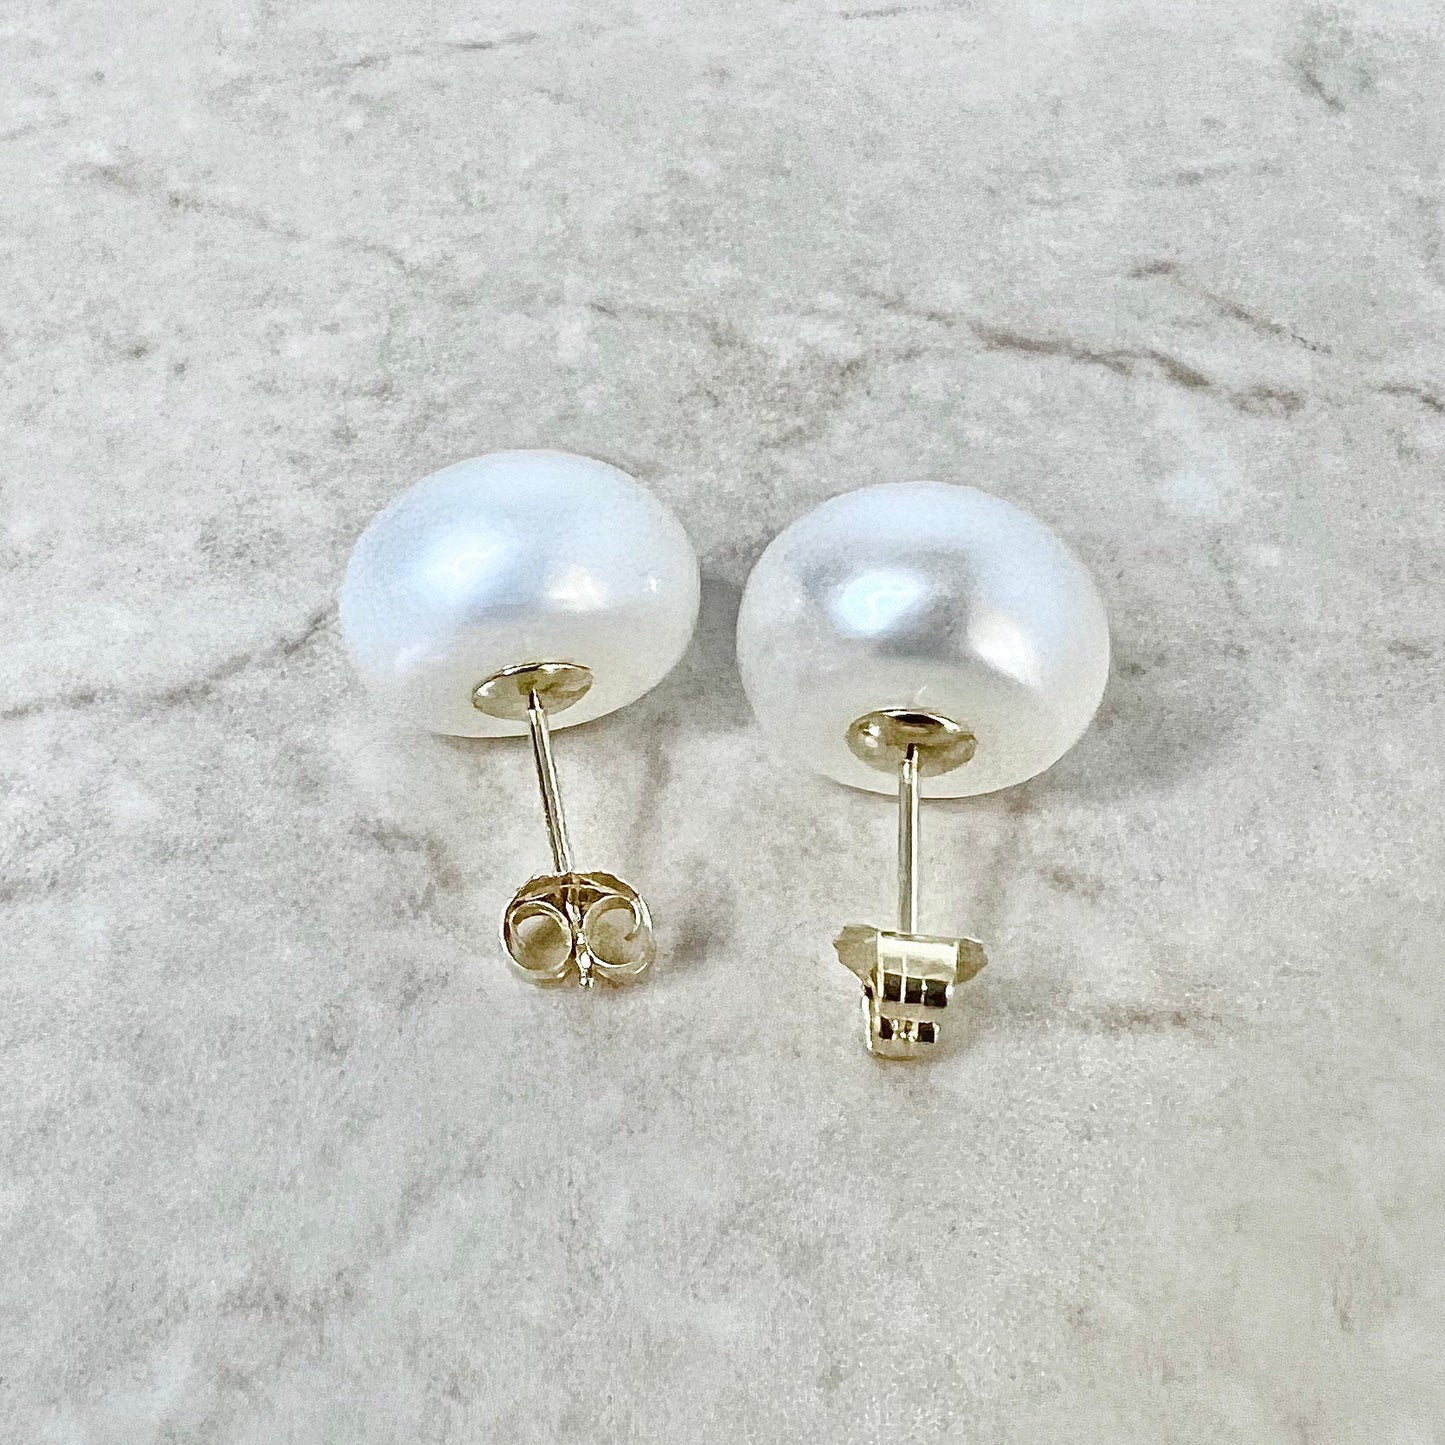 Large 14K 12 mm White Pearl Stud Earrings - Yellow Gold - Genuine Freshwater Button Pearls - June Birthstone - Best Birthday Gift For Her